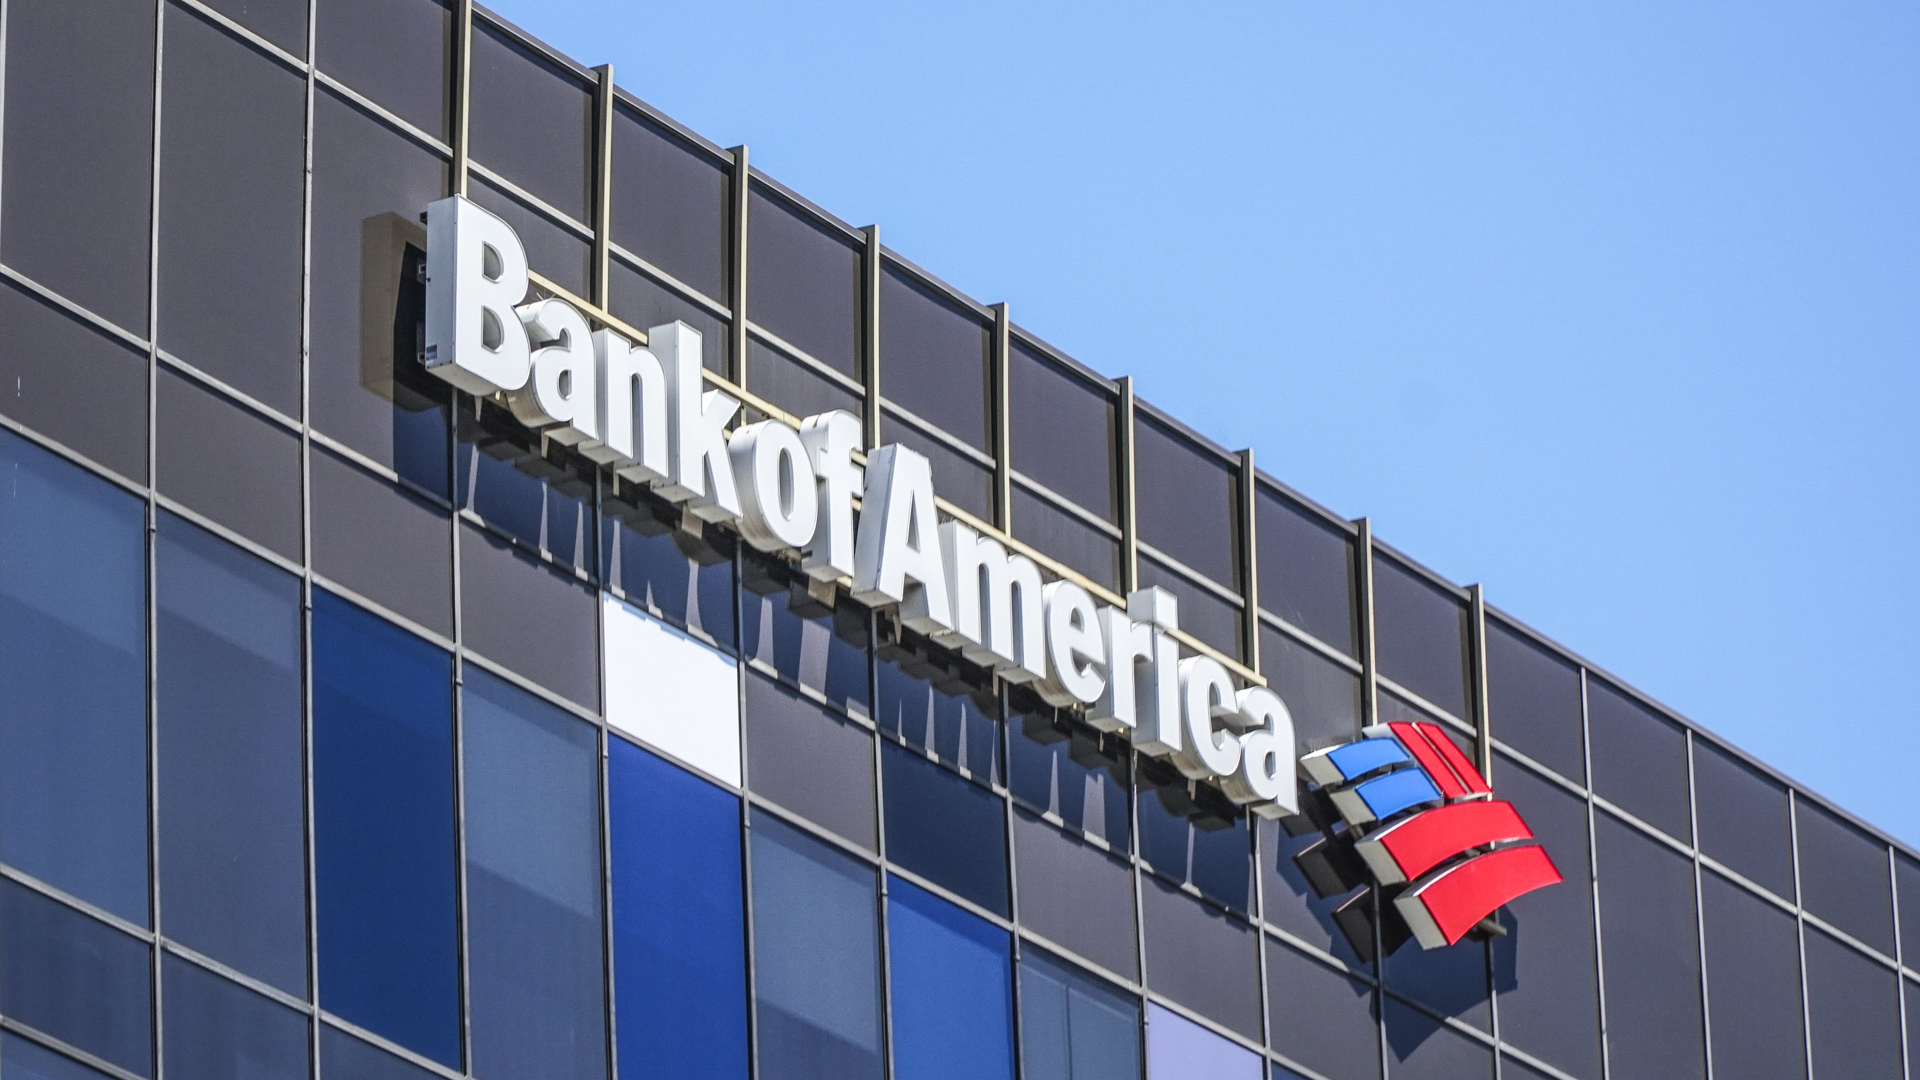 Bank of America offers up to 10K in down payment, closing fee assistance